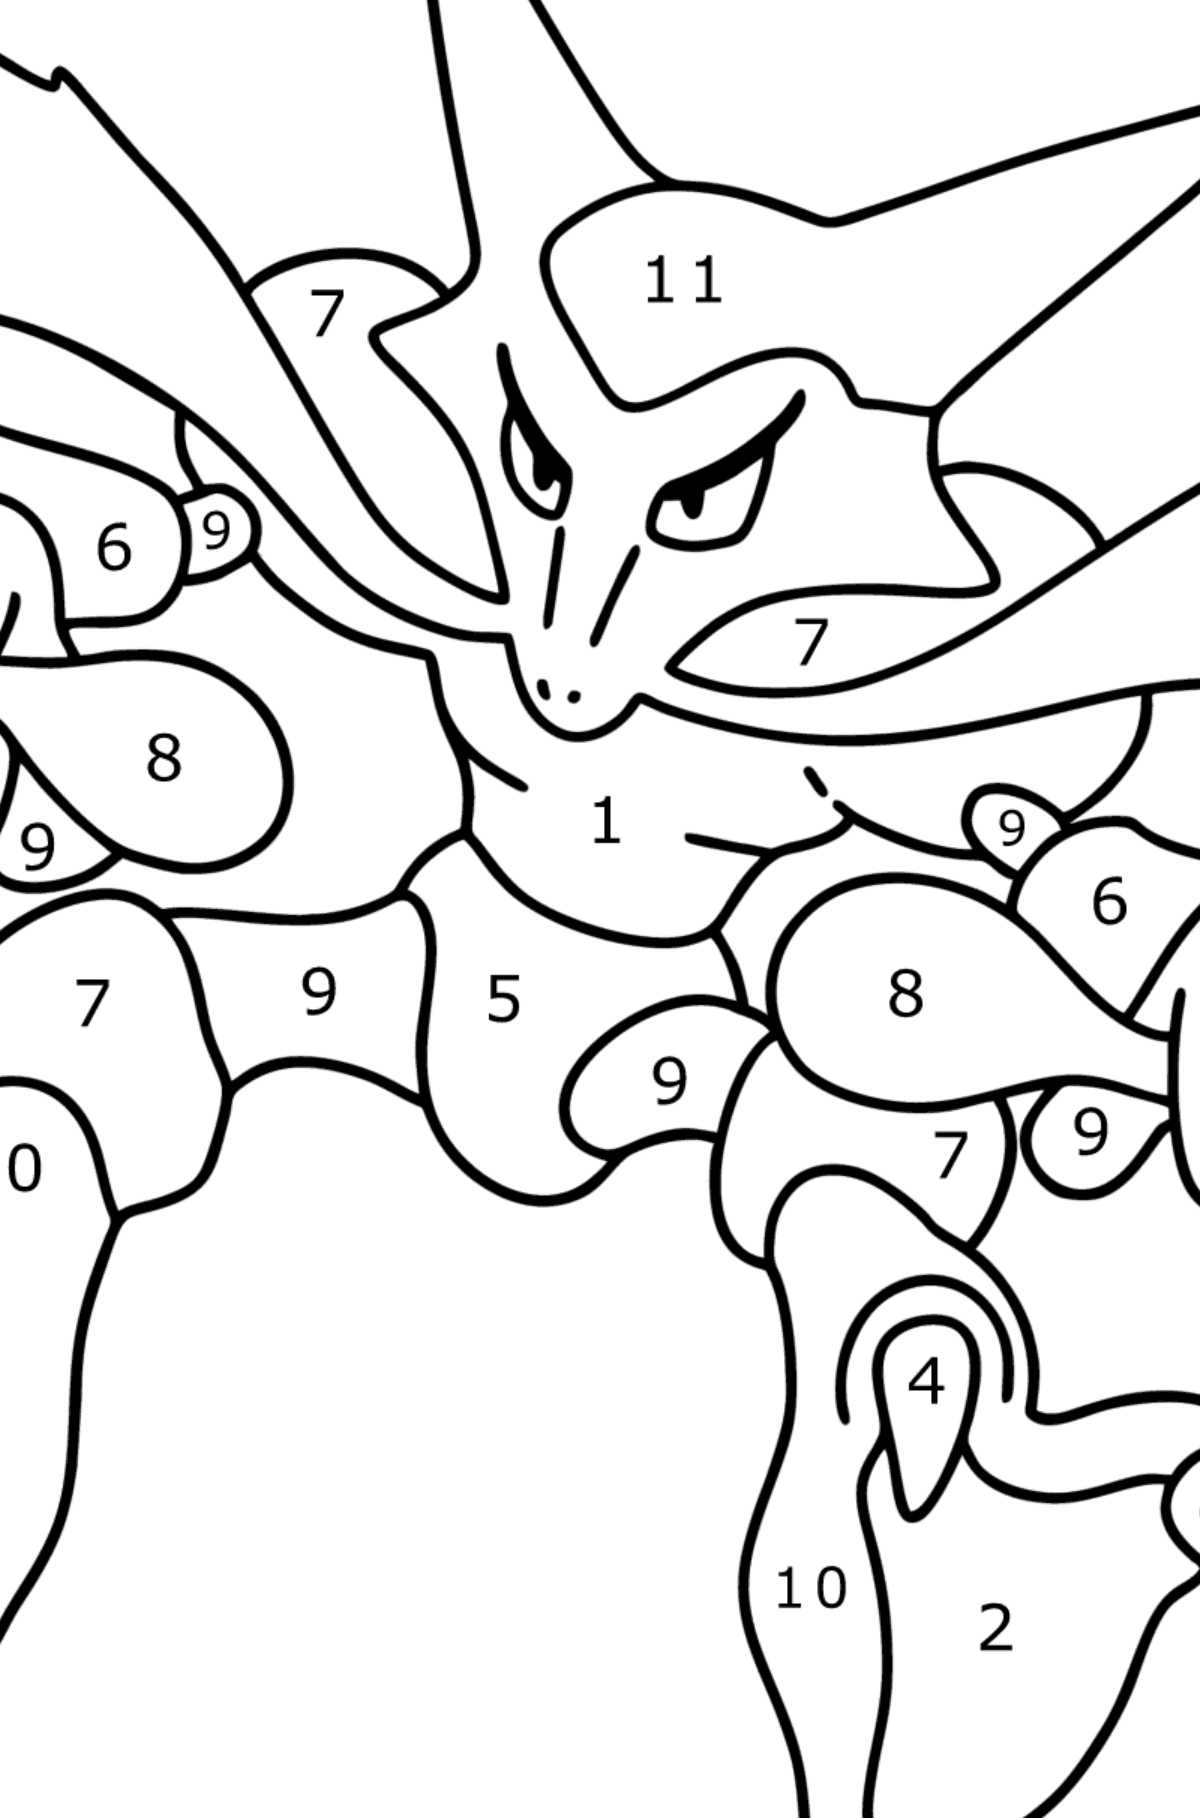 Coloring page Pokemon Go Alakazam - Coloring by Numbers for Kids